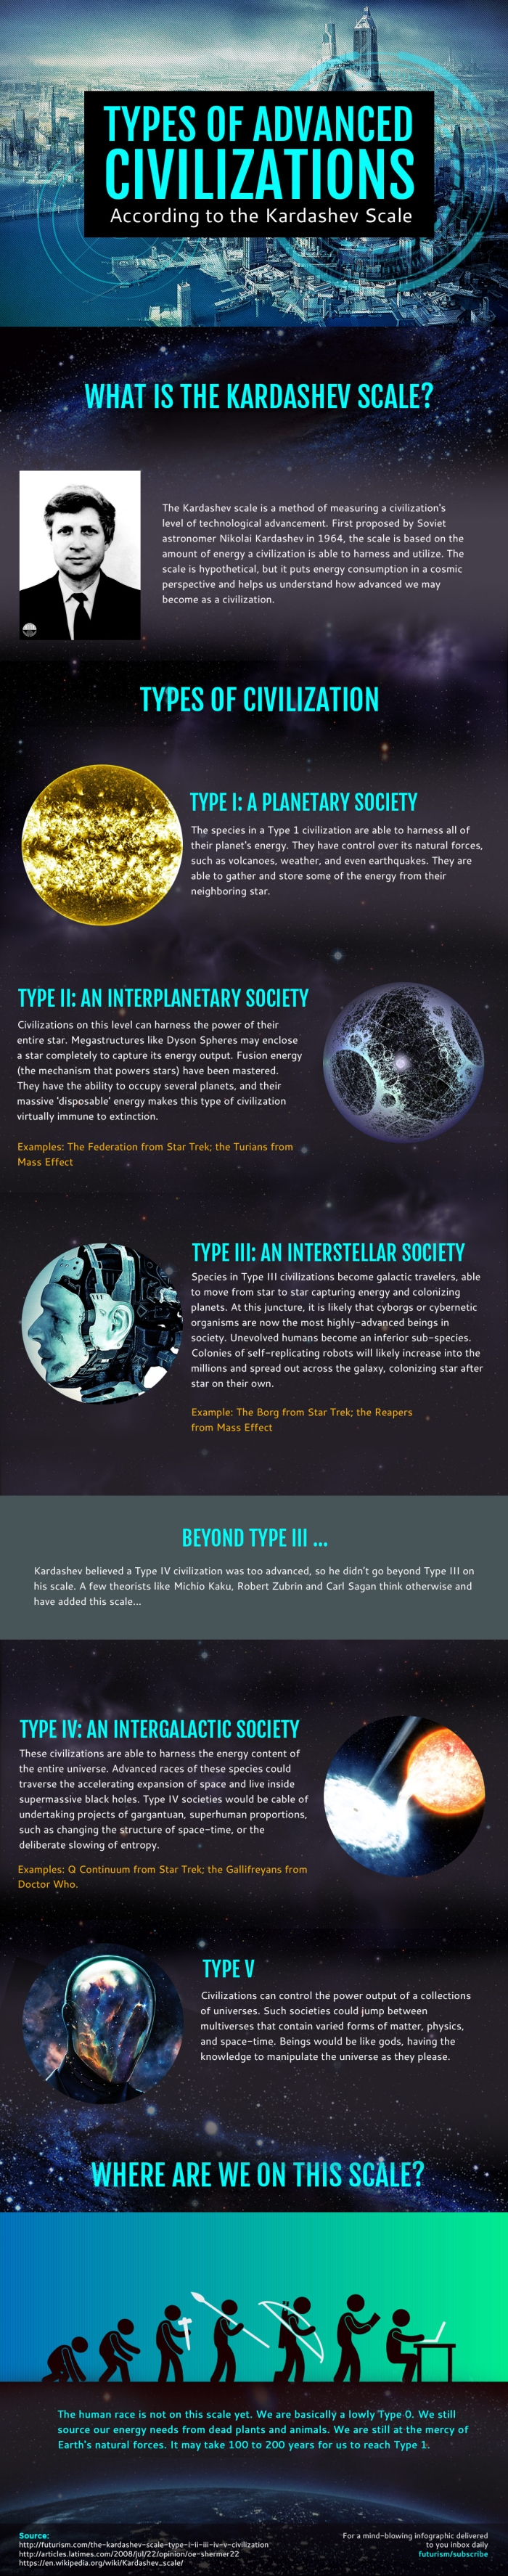 Advanced Civilizations Categorized By The Kardeshev Scale (infographic)